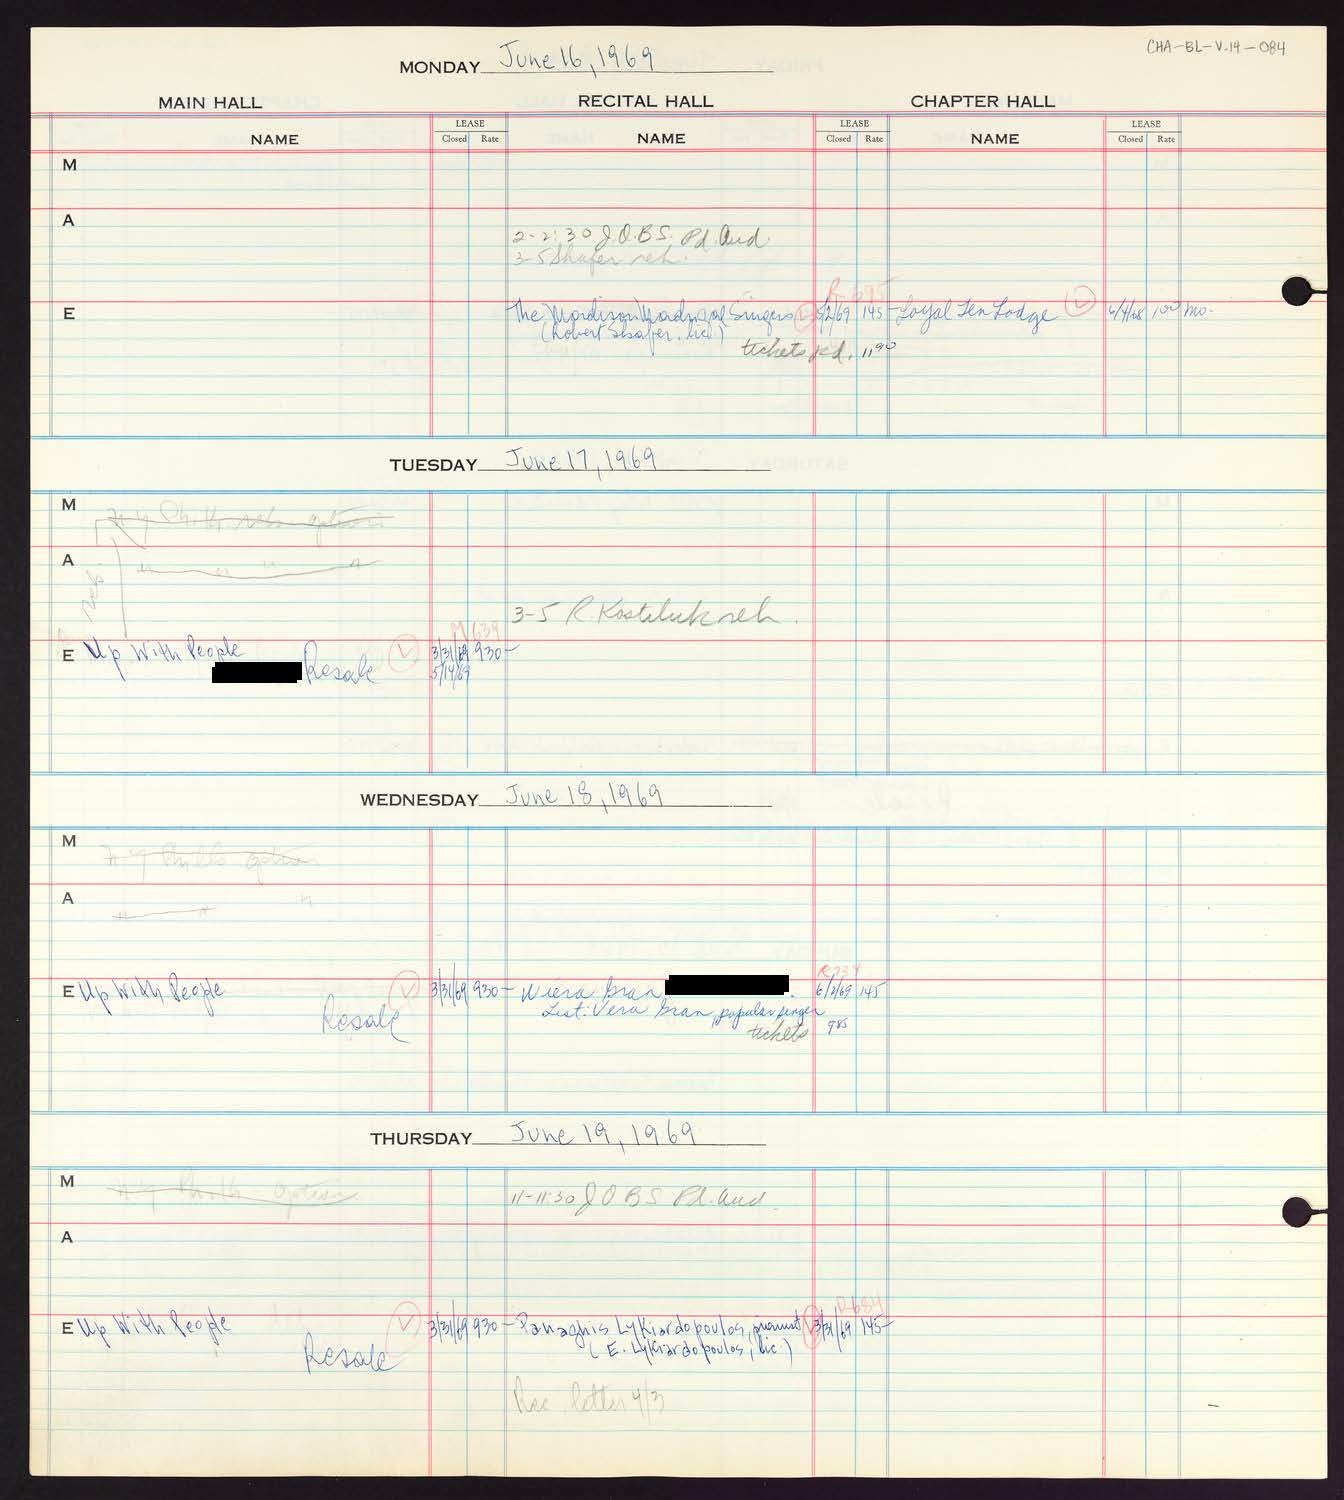 Carnegie Hall Booking Ledger, volume 14, page 84